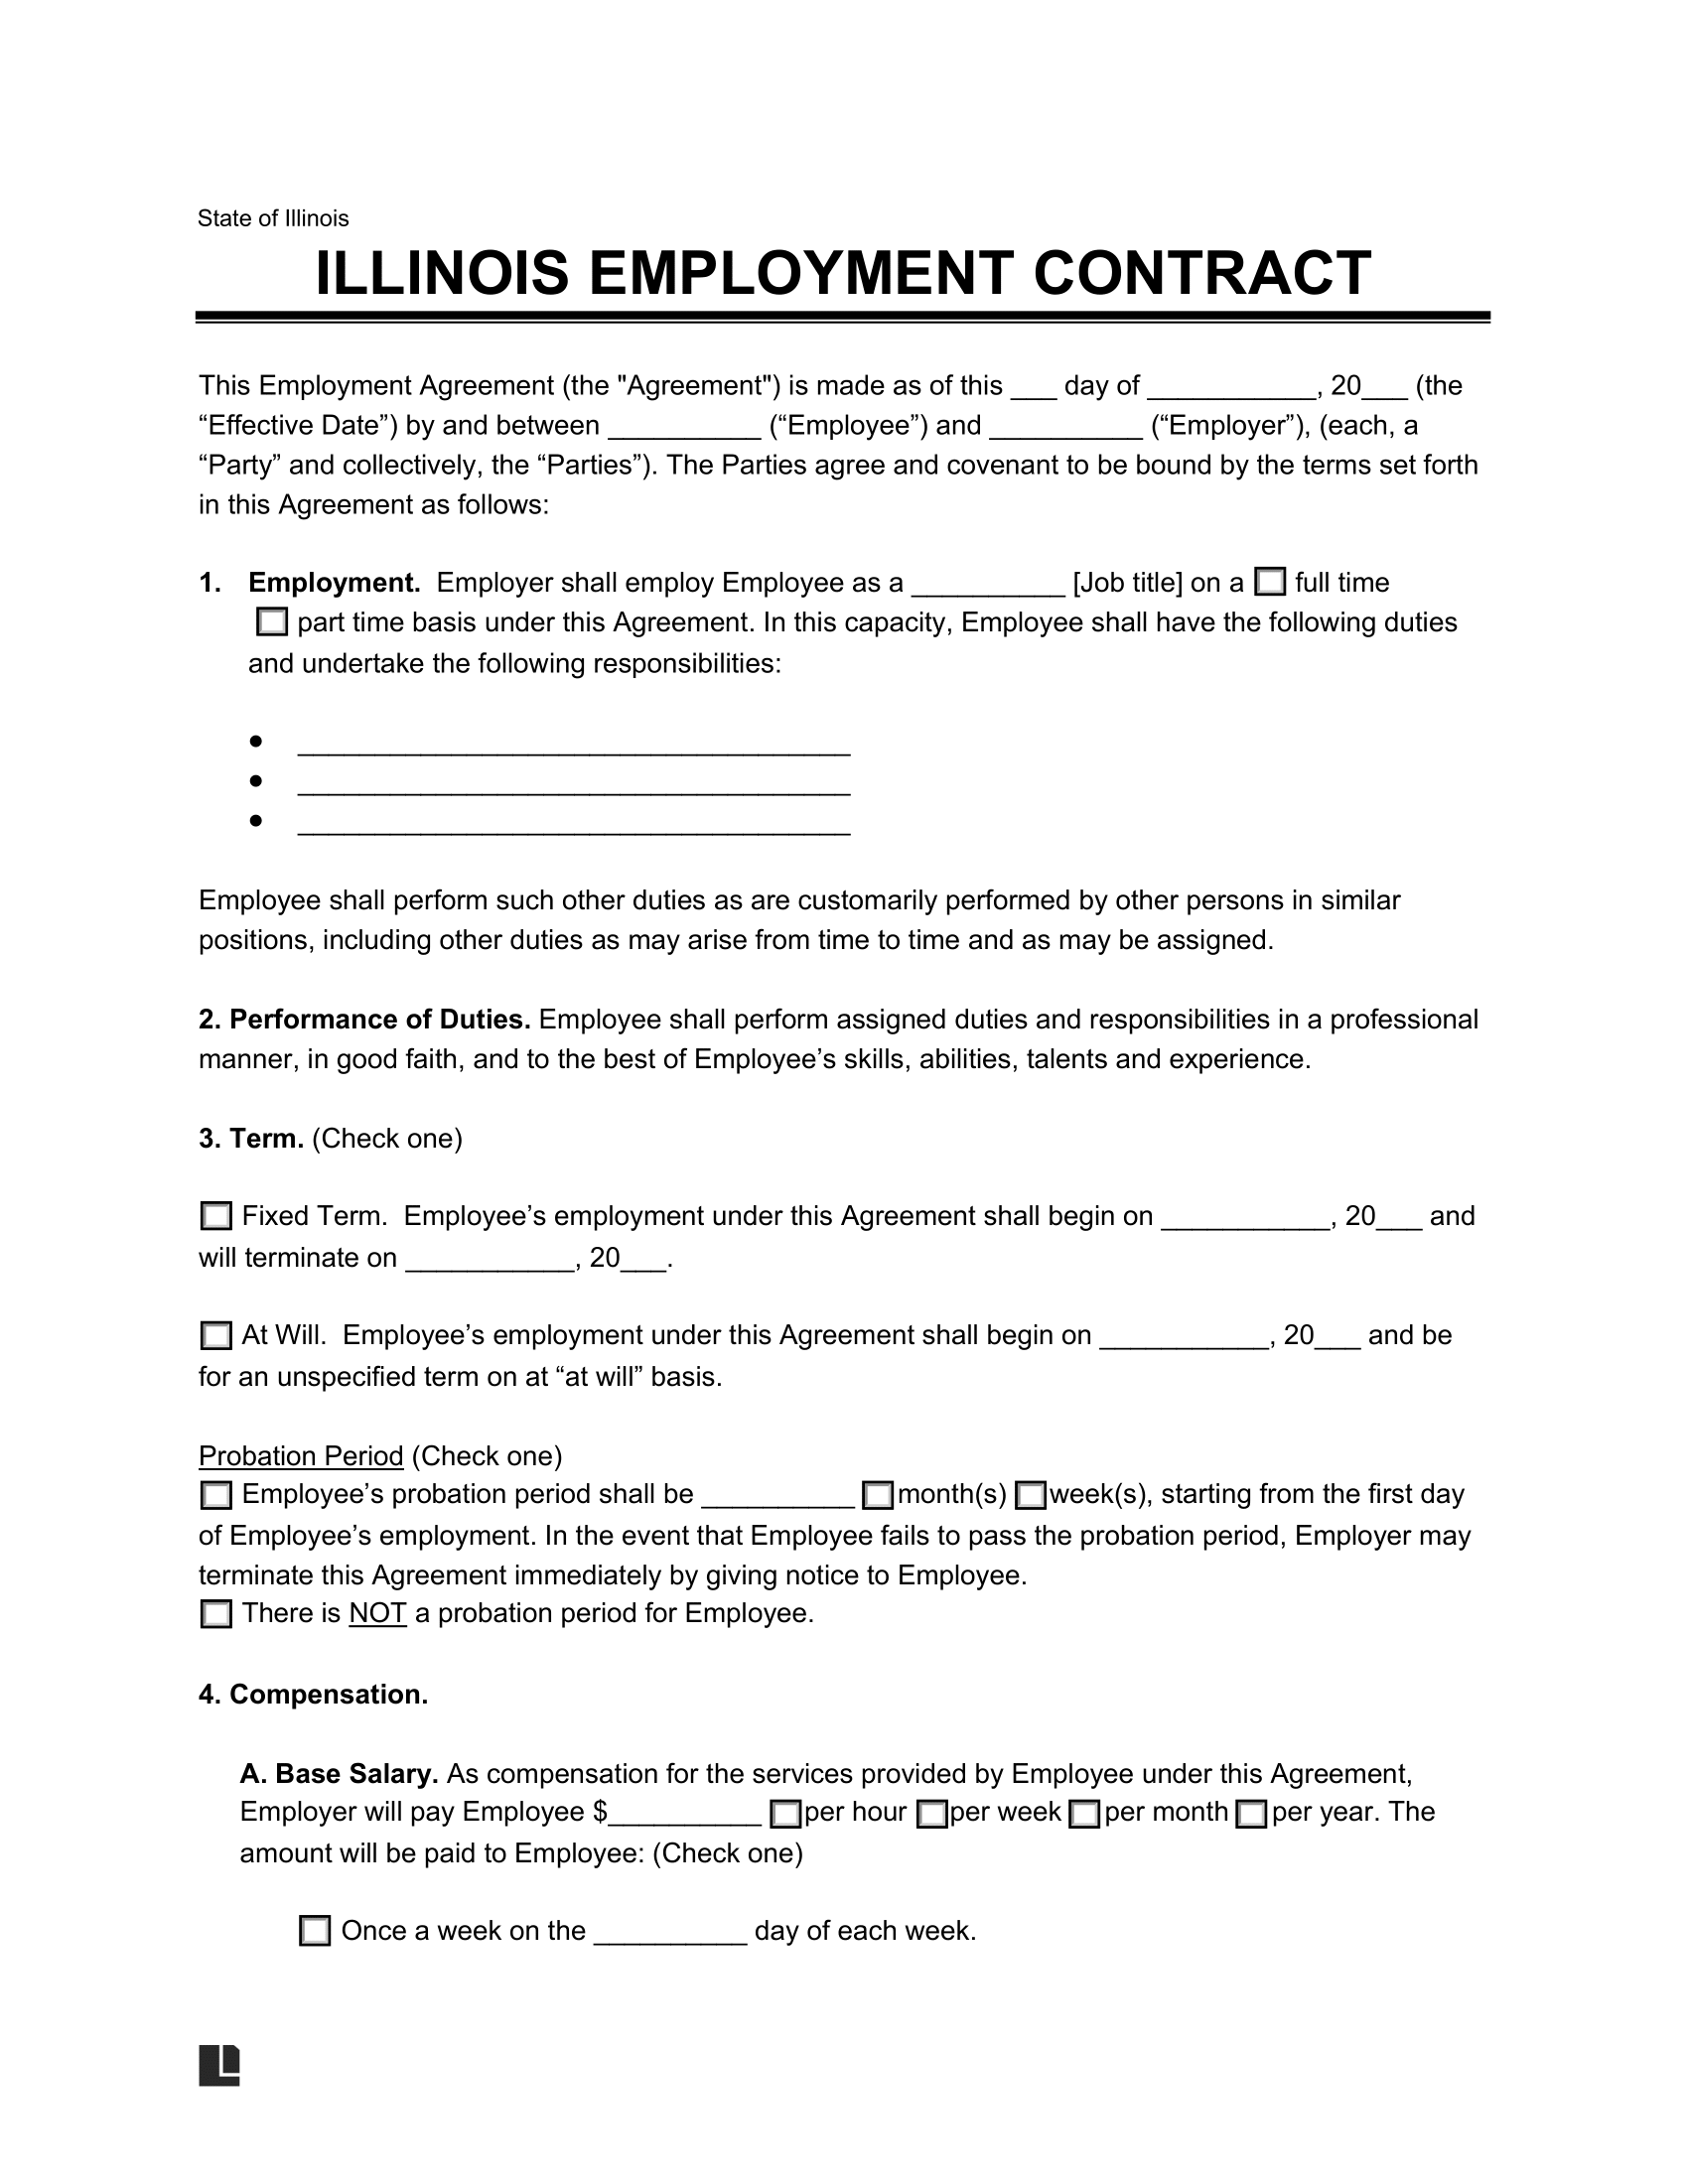 illinois employment contract template